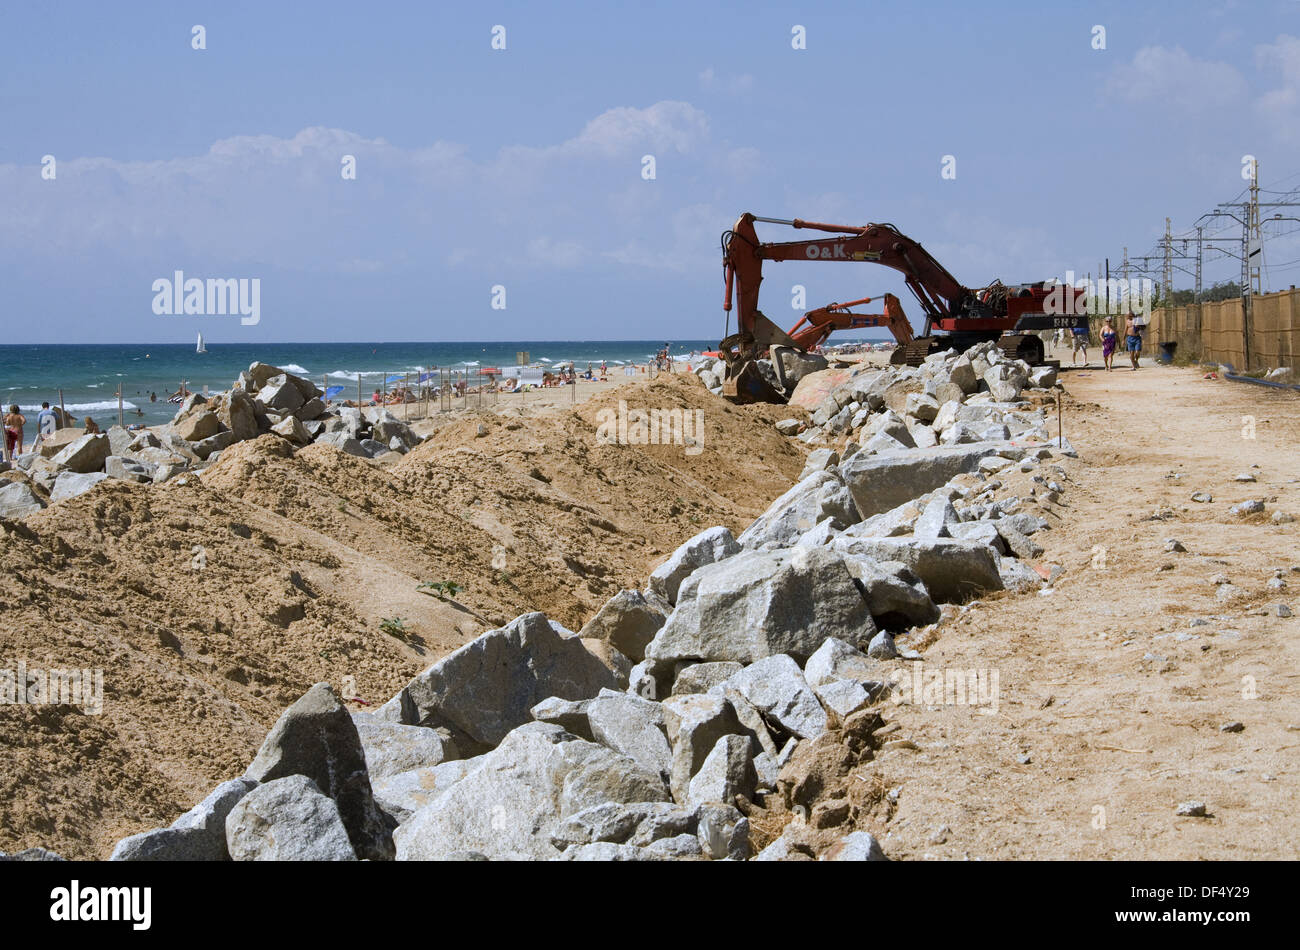 Public works at the beach. El Maresme, Catalonia, Spain Stock Photo